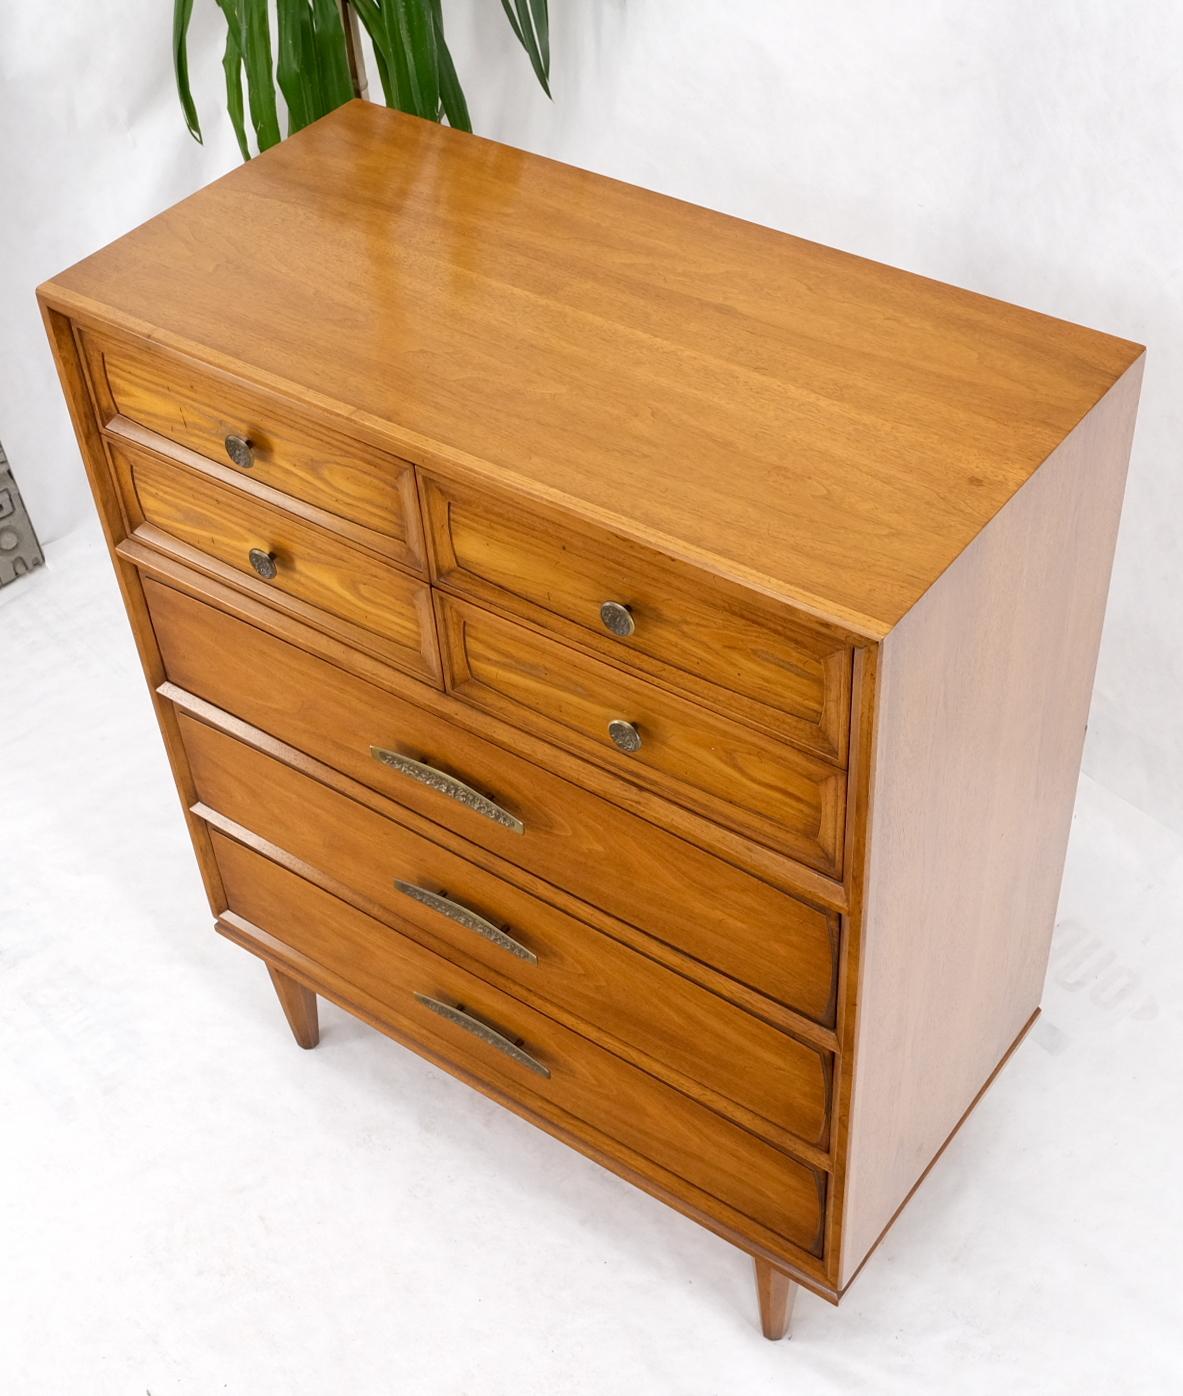 Light Walnut Hammered Brass Pulls 5 Drawer Chest of Drawers Dresser Mint In Good Condition For Sale In Rockaway, NJ